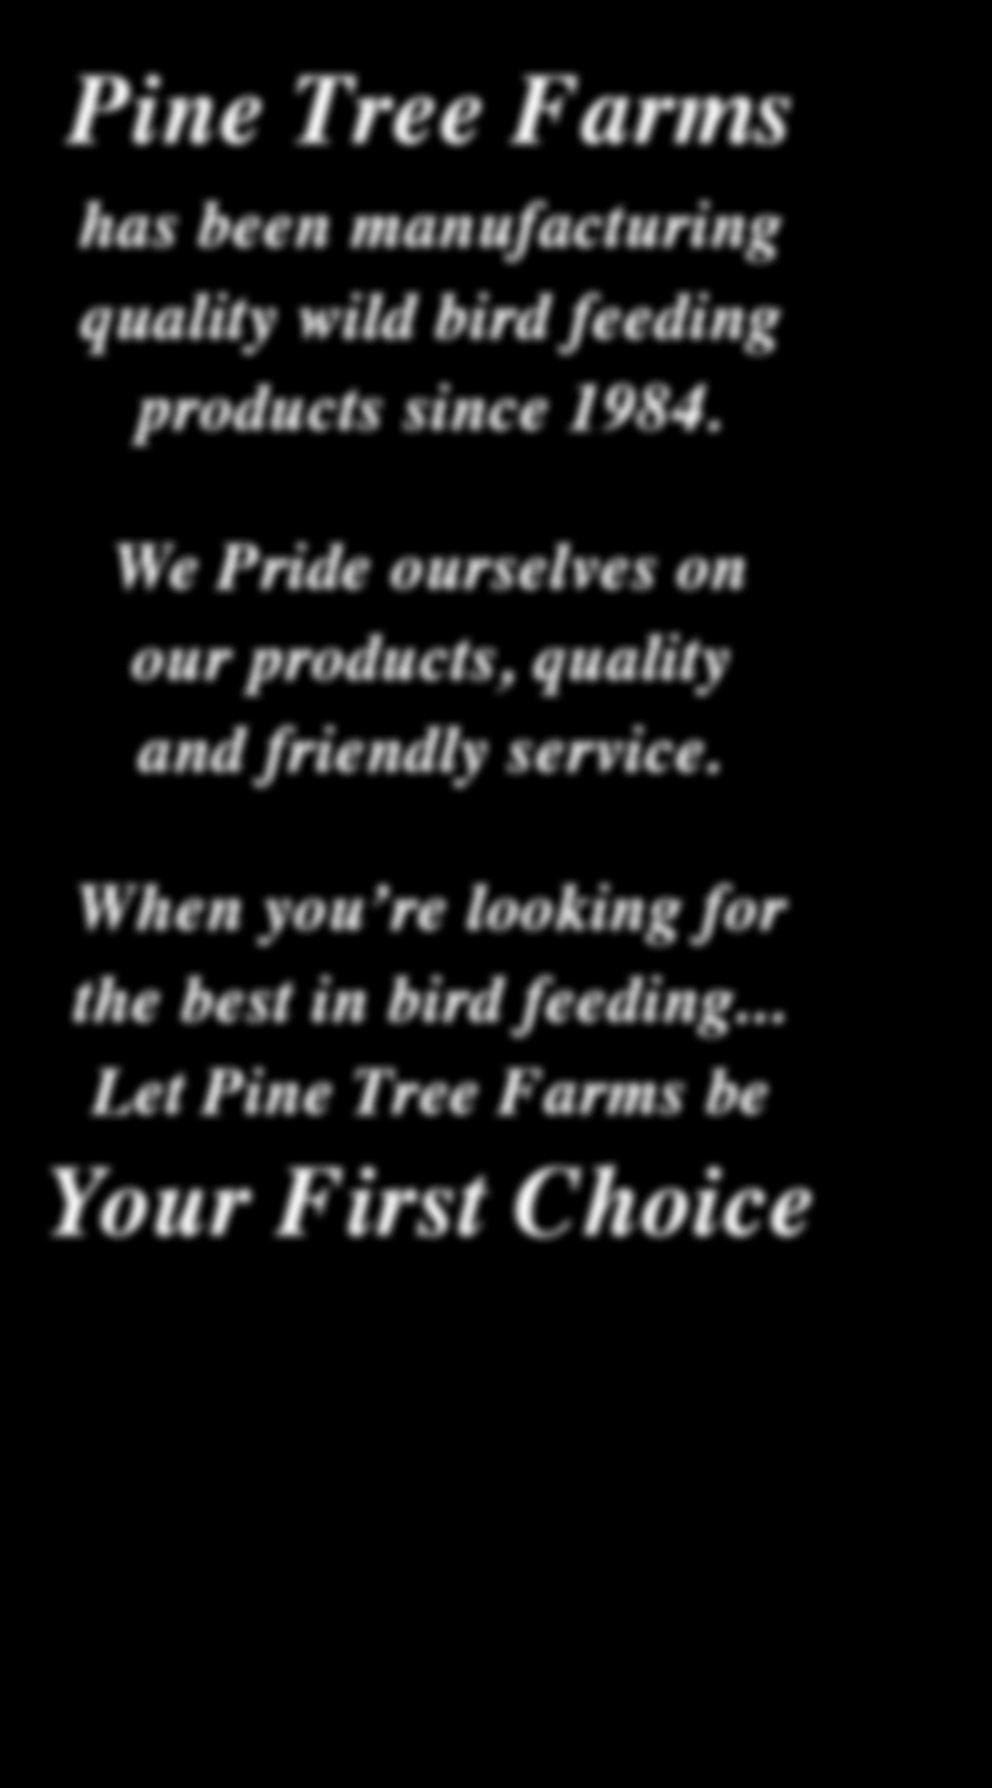 1984. We Pride ourselves on our products,